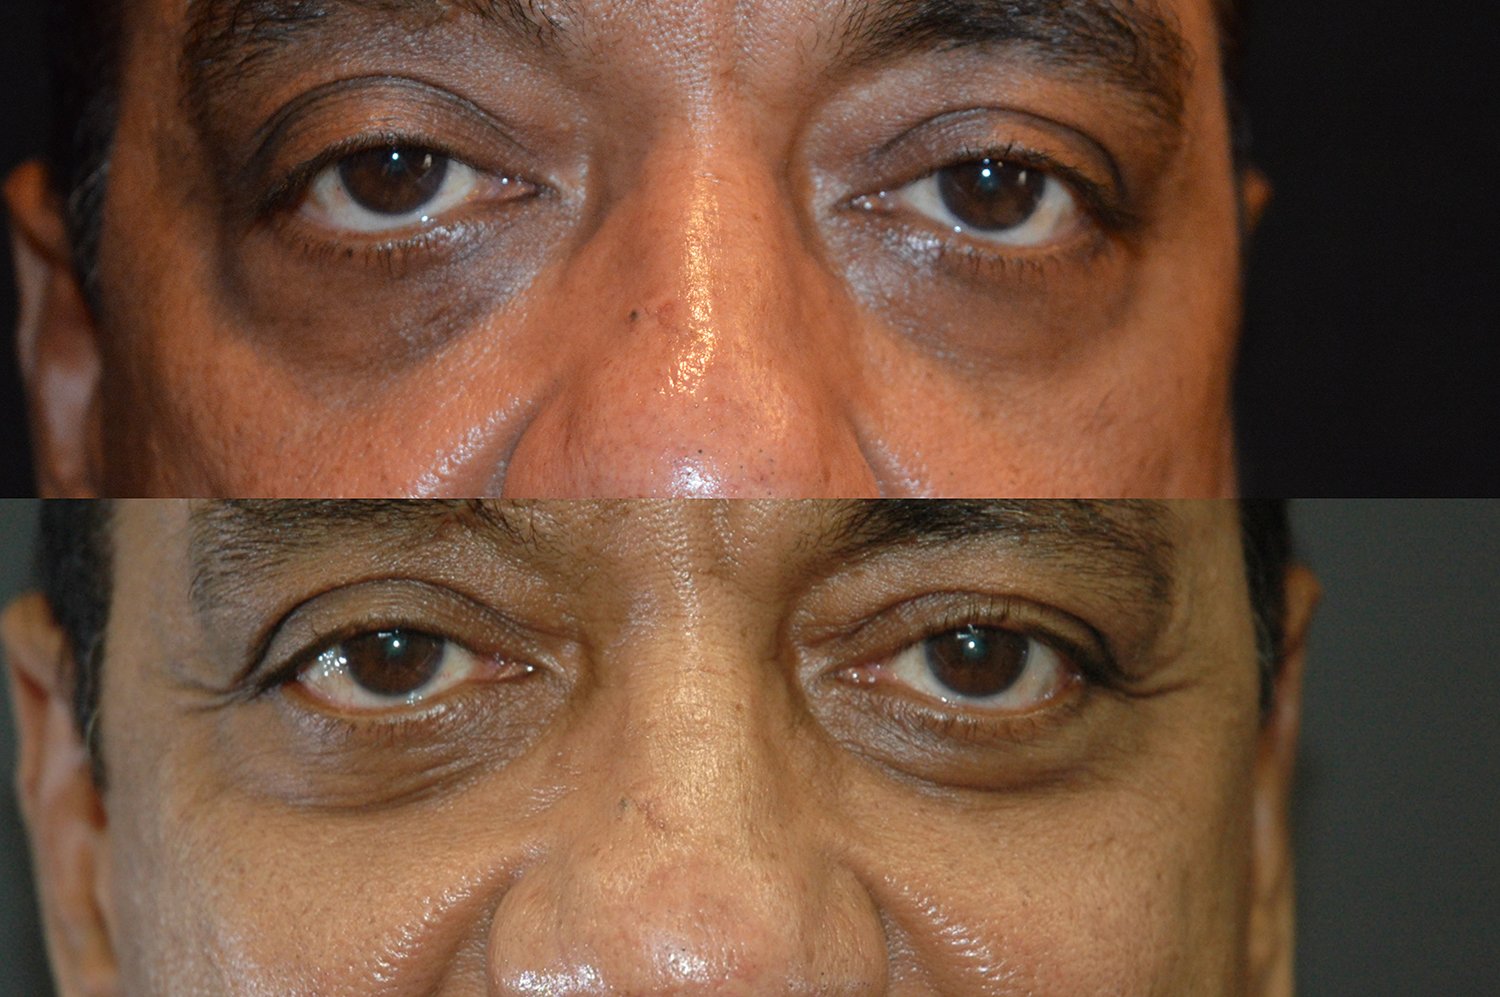 57-year-old lower eyelid transconjunctival bleph w. fat transposition, 2 years after surgery forward gaze